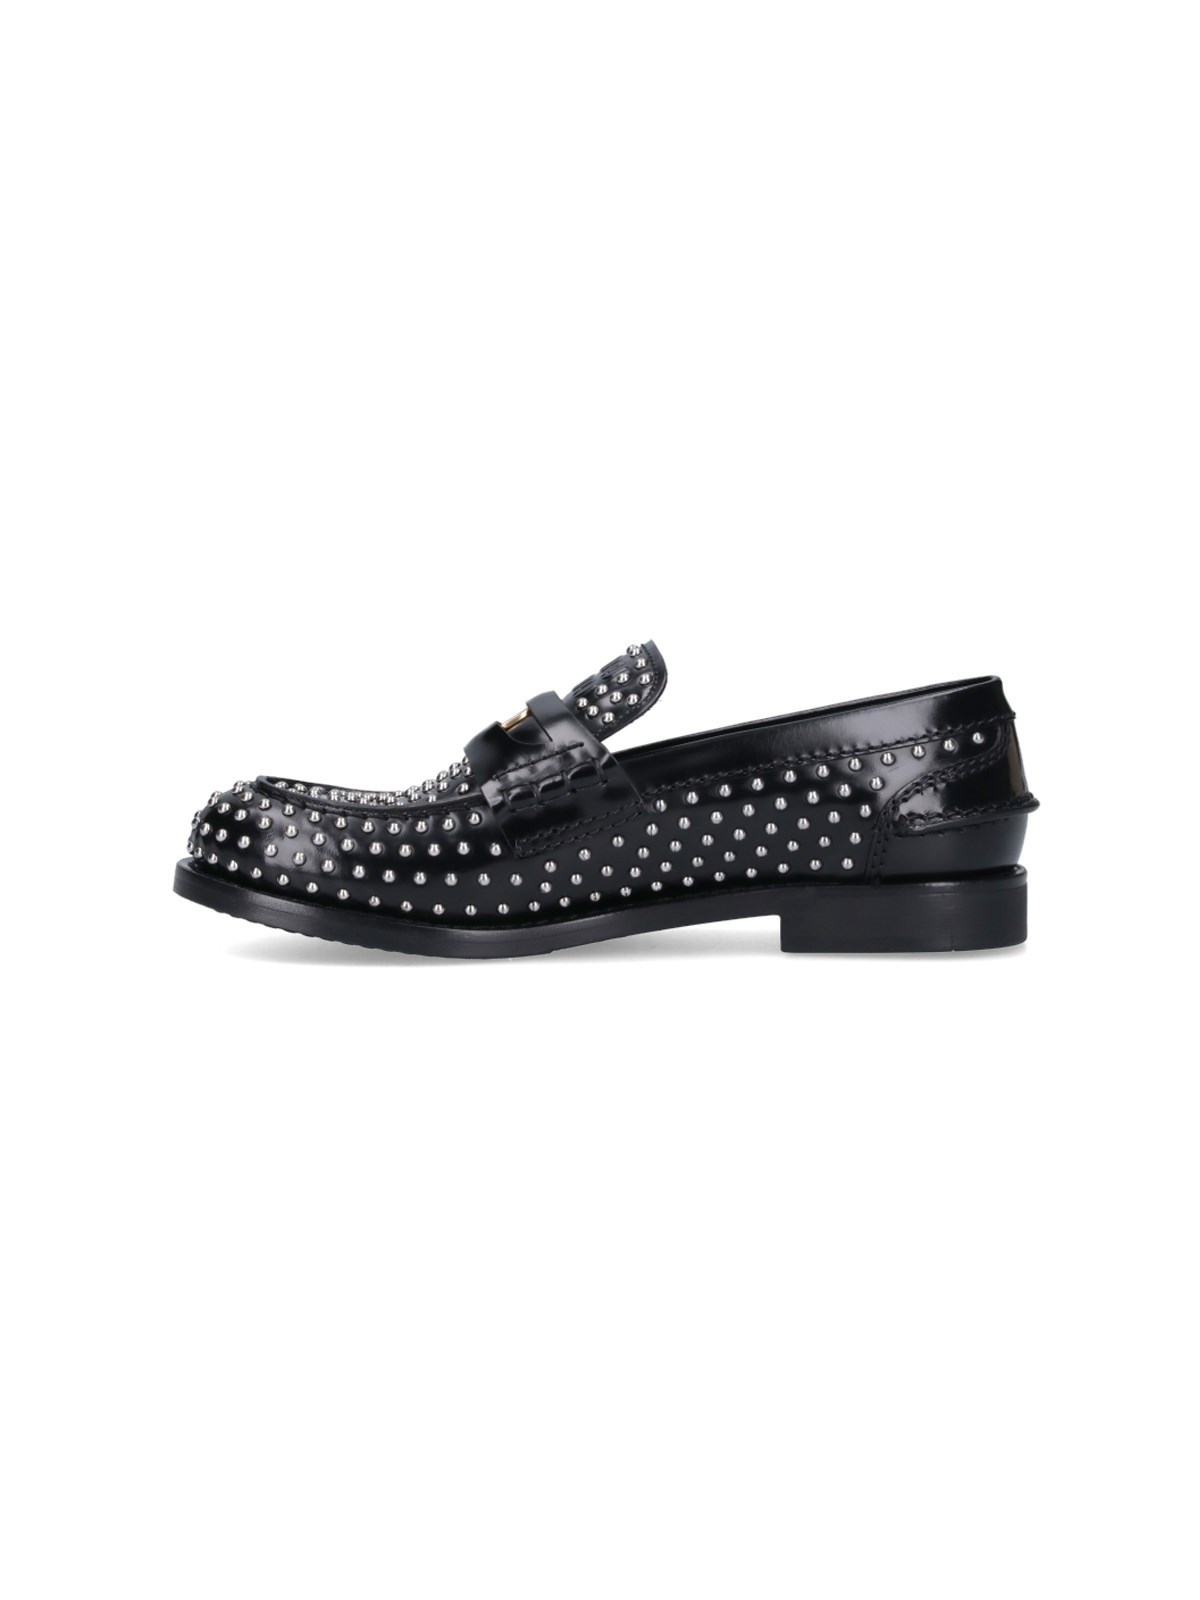 "PENNY LOAFERS" STUDDED LOAFERS - 3